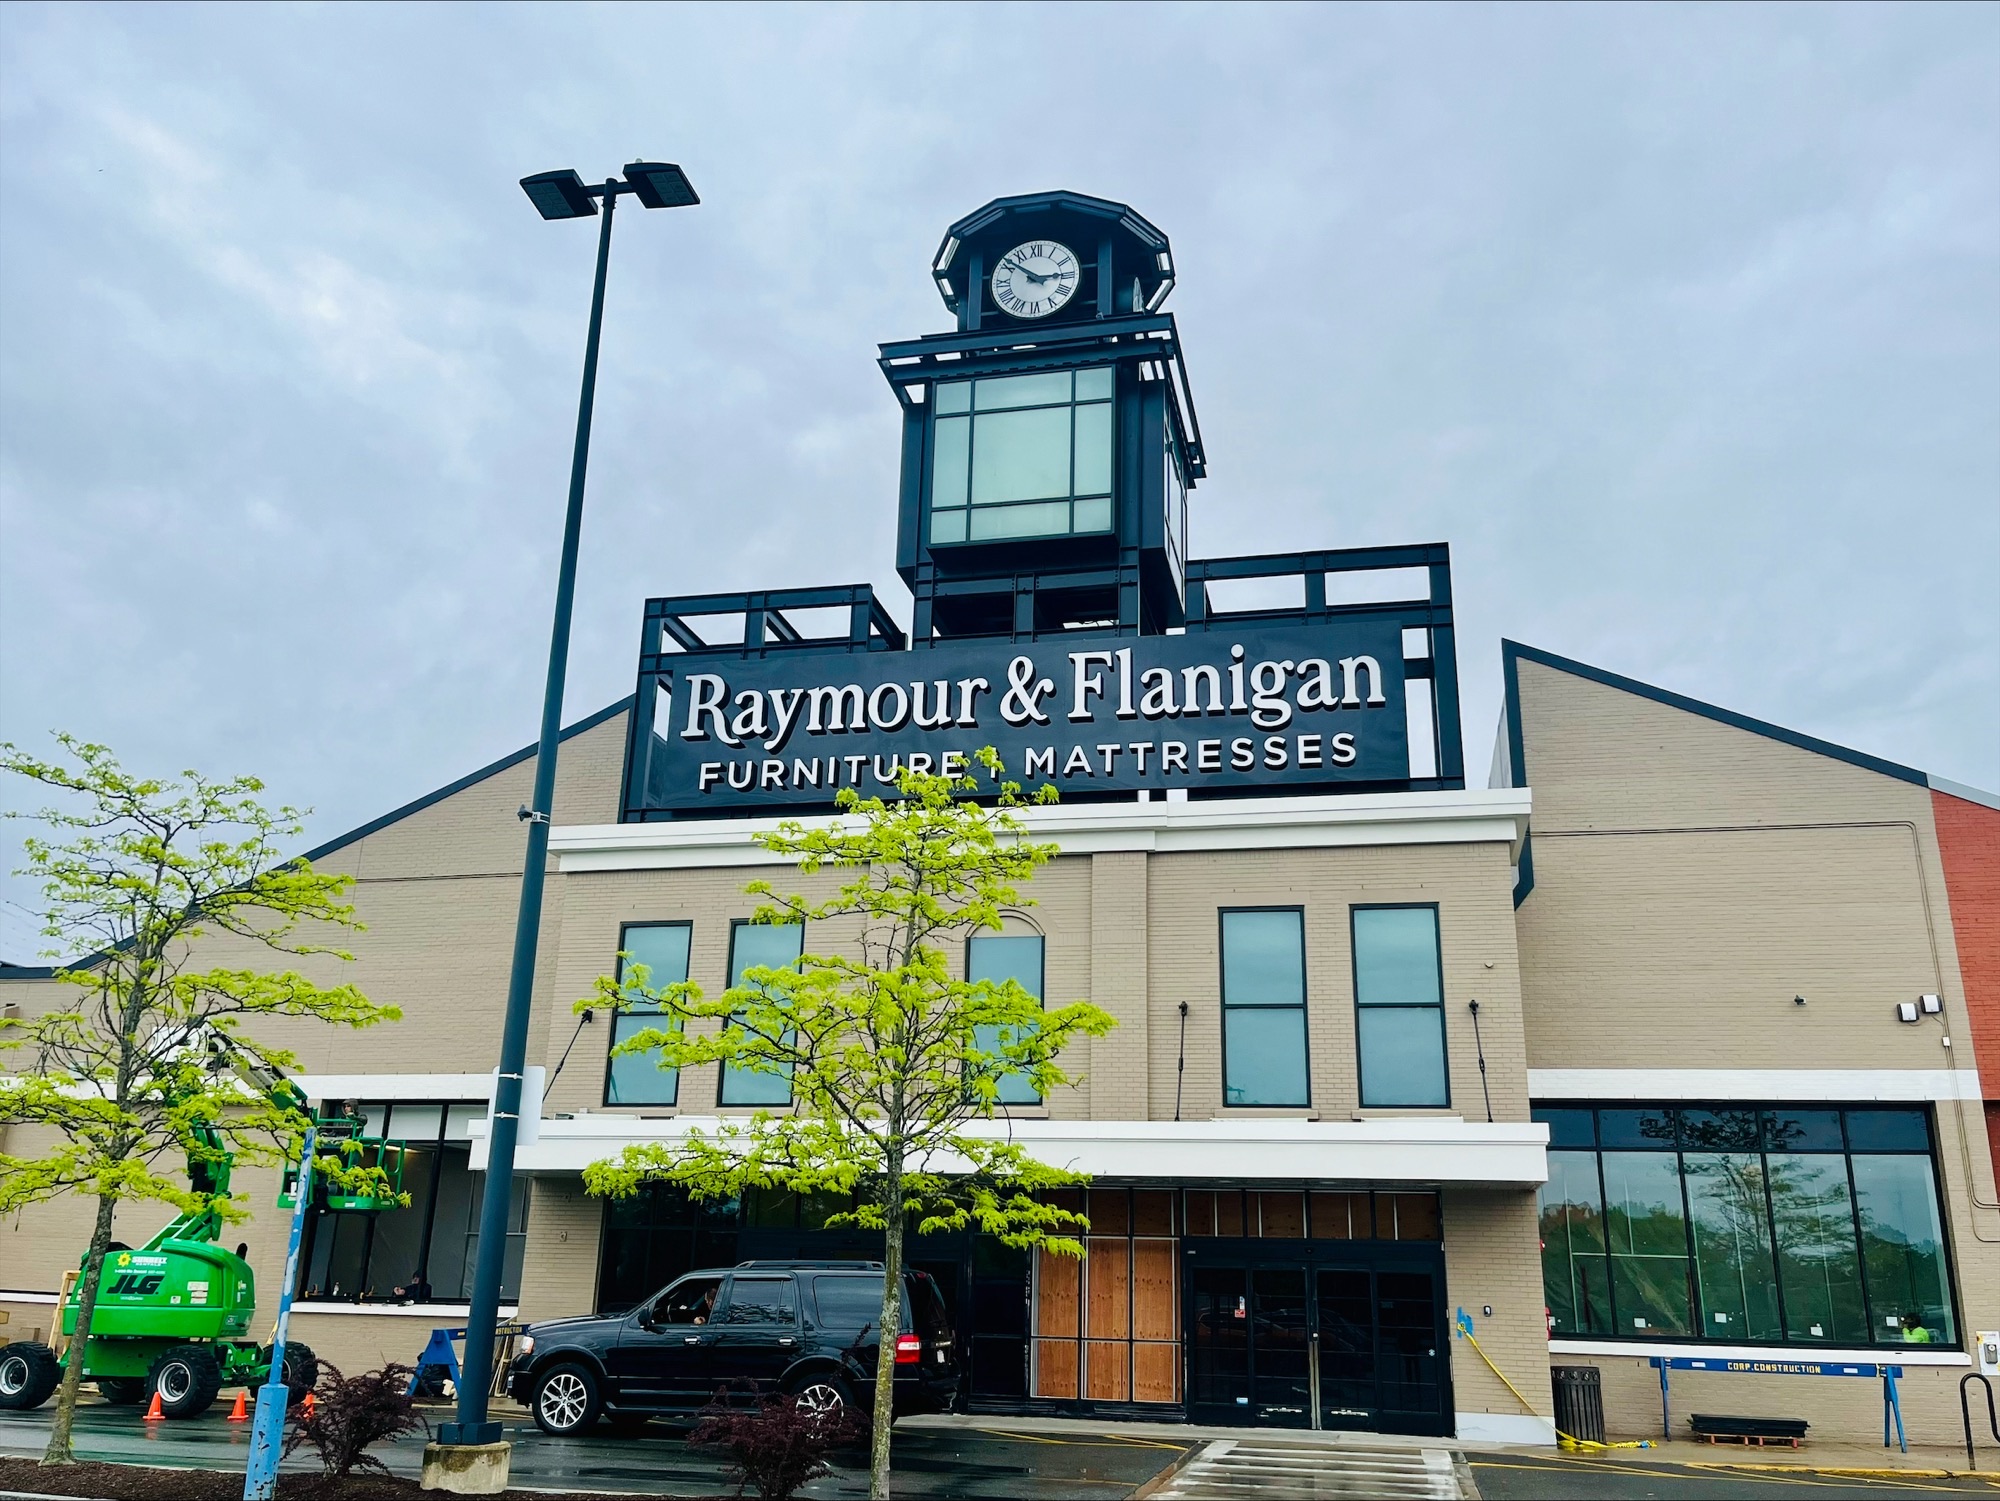 Raymour & Flanigan Furniture and Mattress Store - Somerville, MA 02145 - (617)440-1005 | ShowMeLocal.com